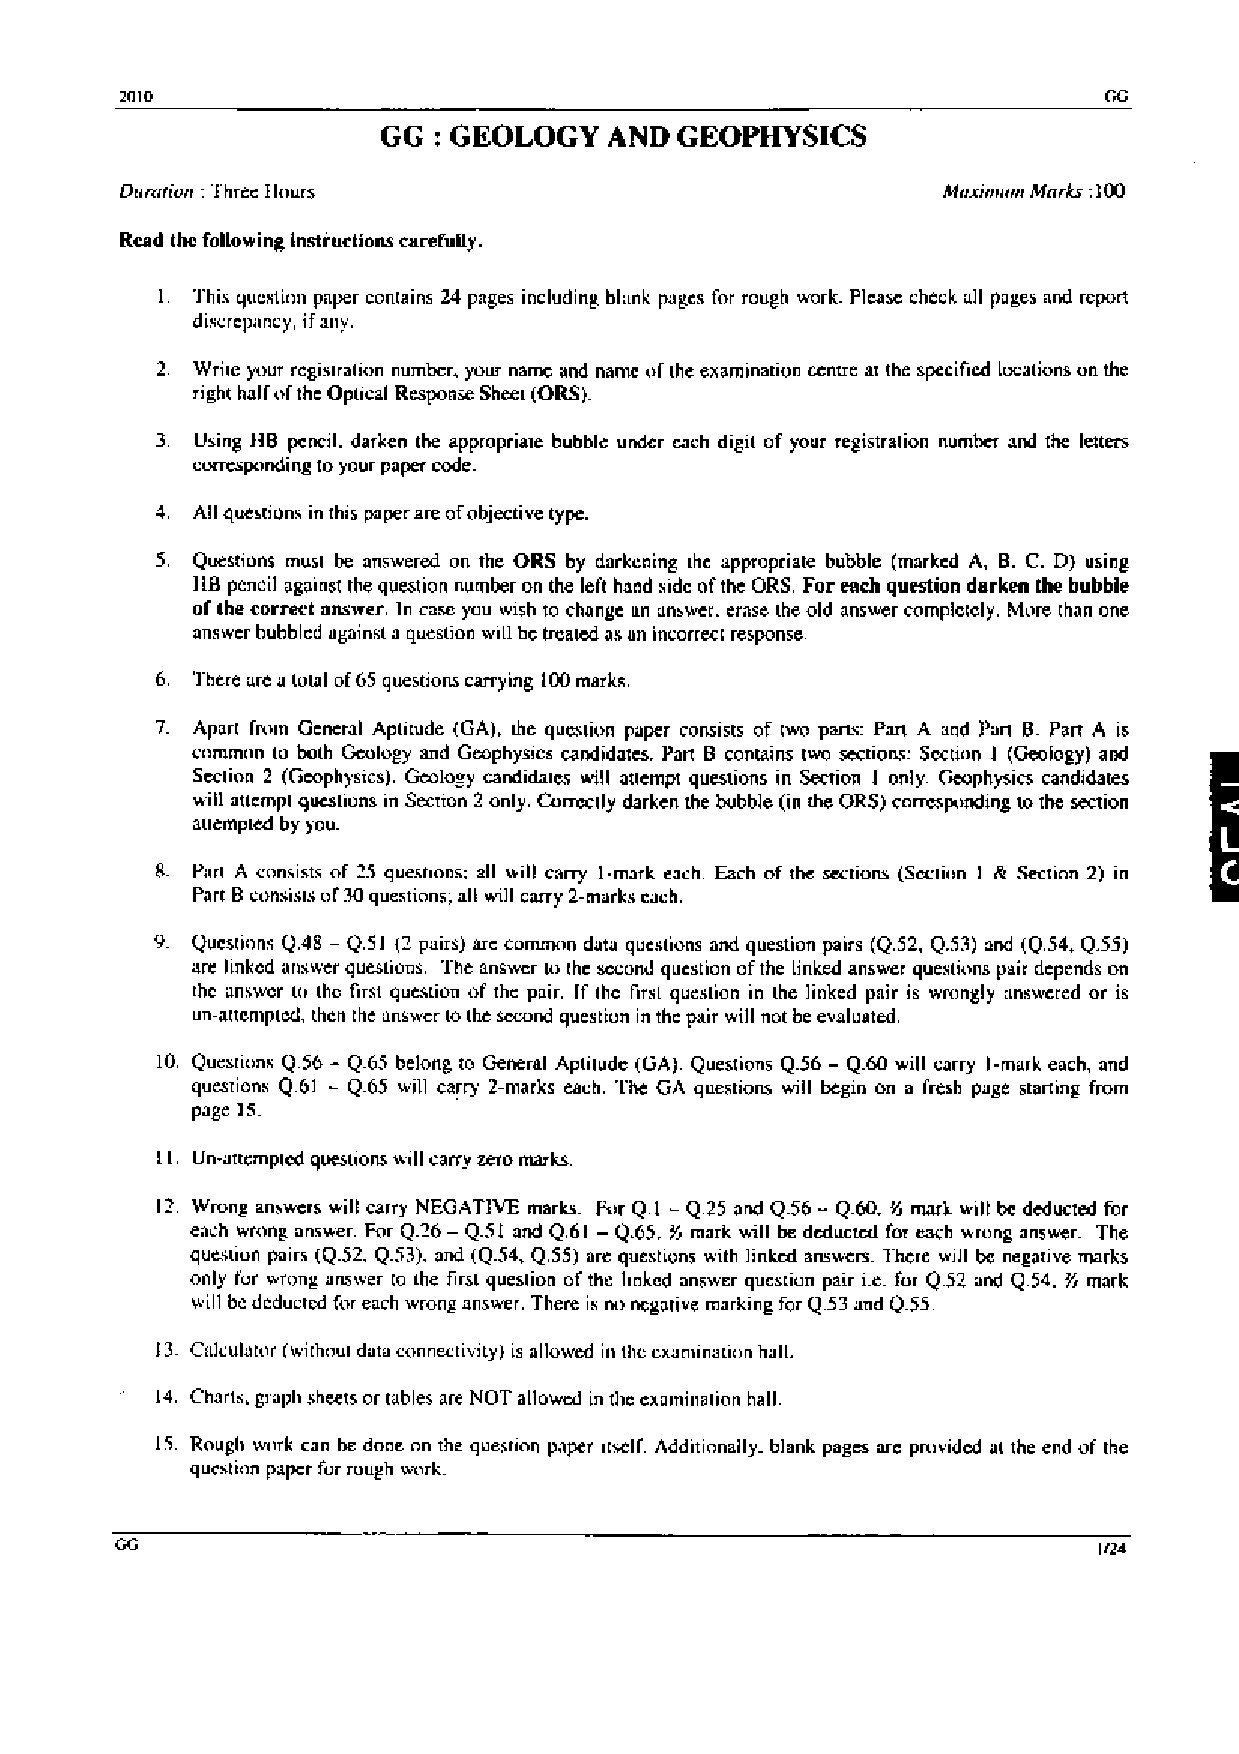 GATE Exam Question Paper 2010 Geology and Geophysics 1